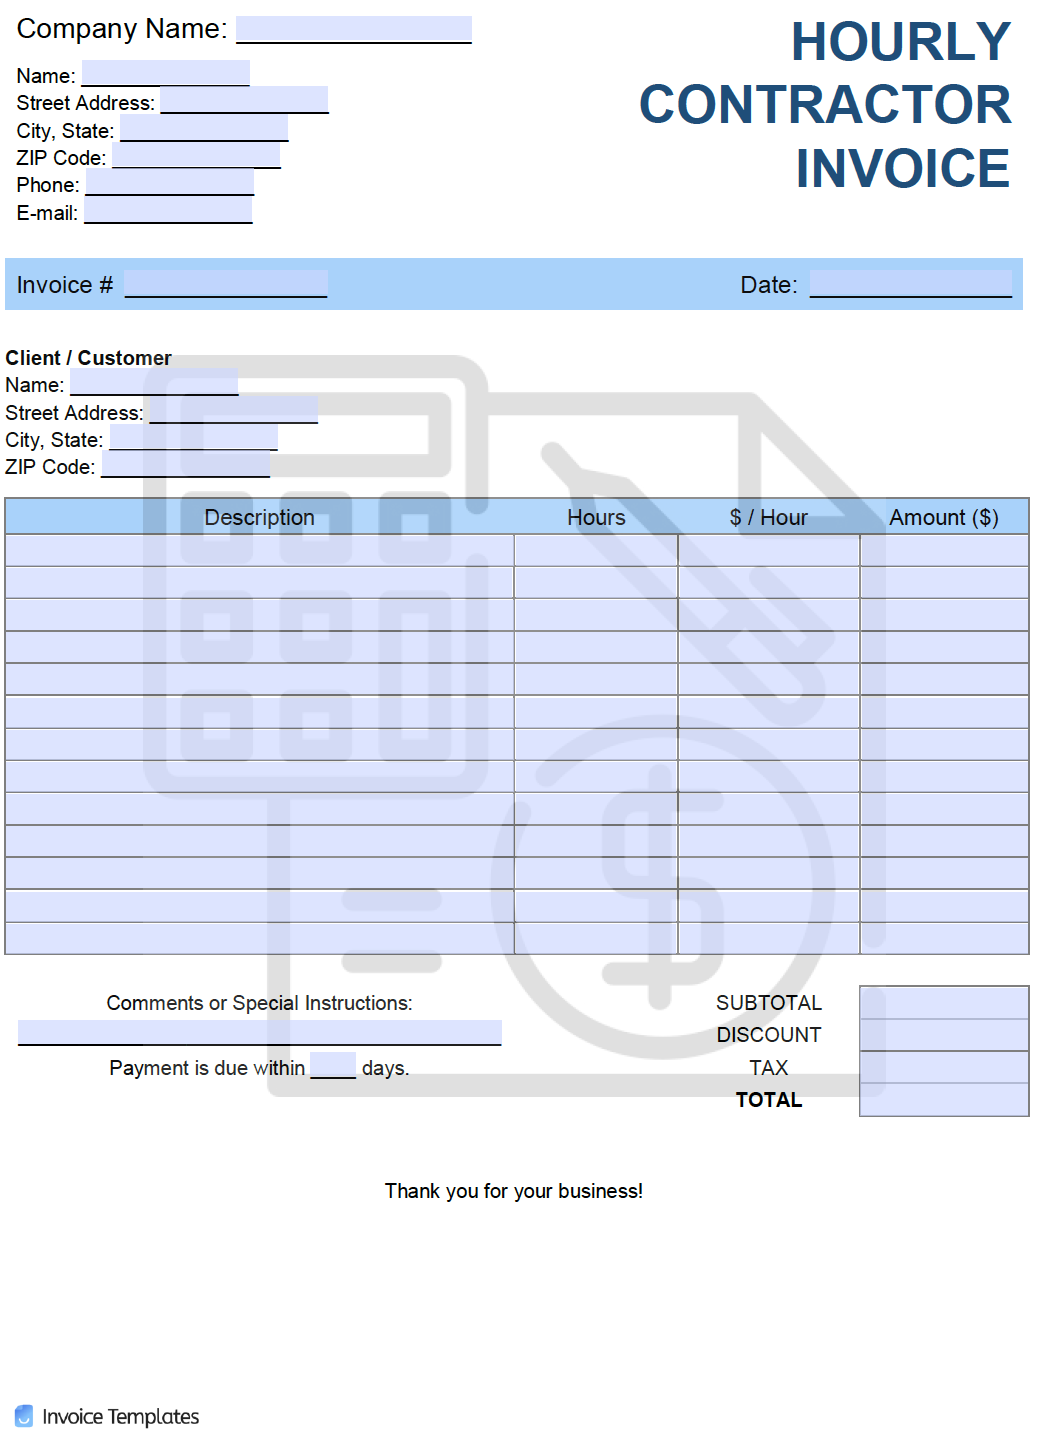 invoice-for-hours-worked-template-free-sherristarnes-blog